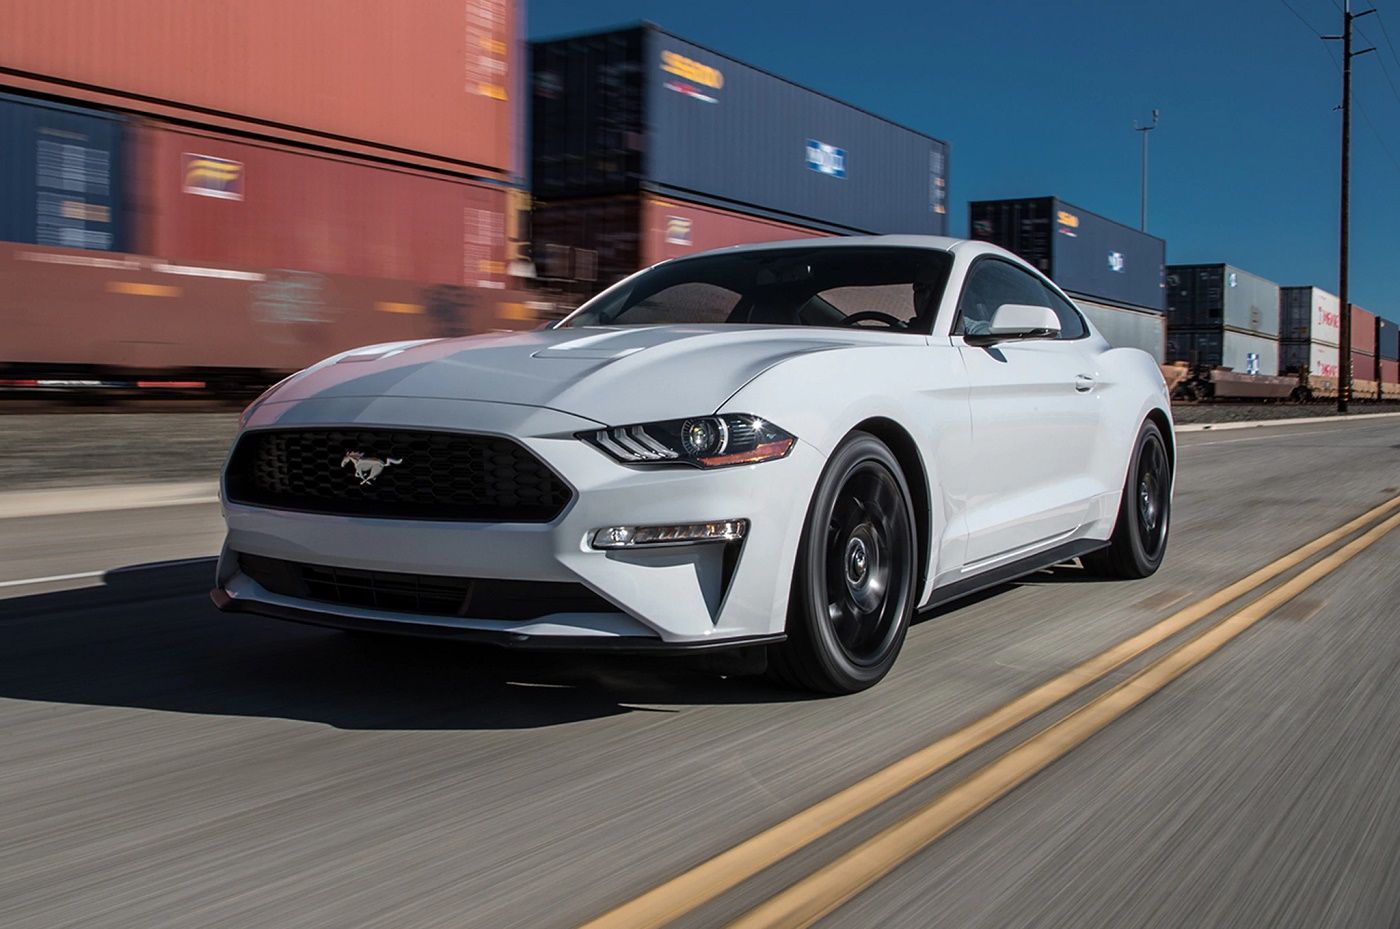 Oxford White 2018 Ford Mustang speeding on an urban road